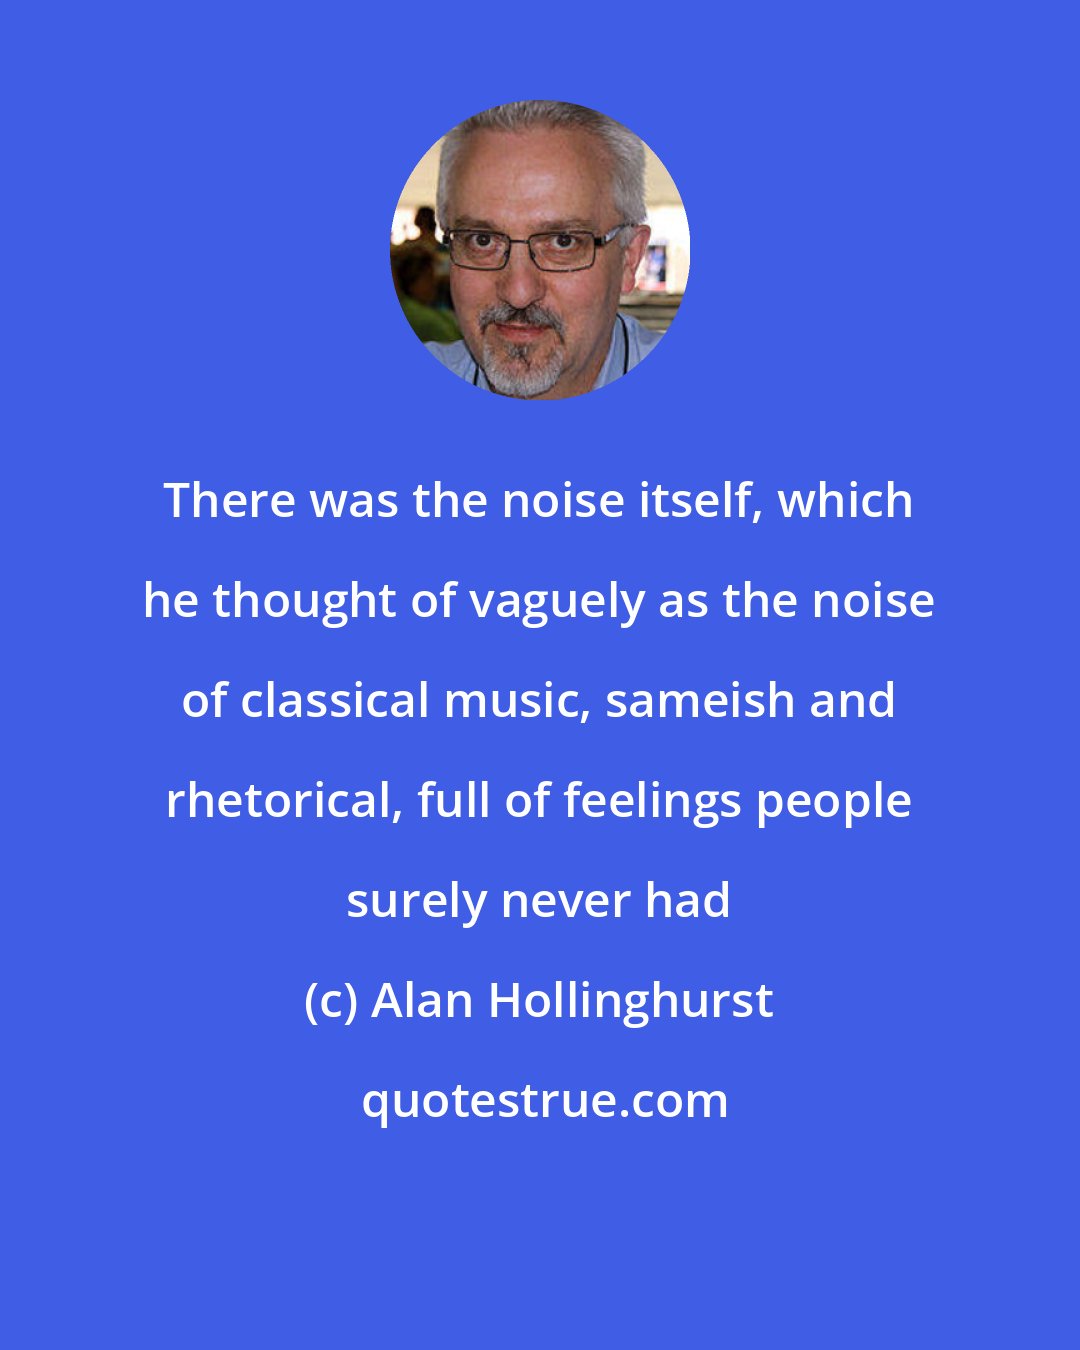 Alan Hollinghurst: There was the noise itself, which he thought of vaguely as the noise of classical music, sameish and rhetorical, full of feelings people surely never had